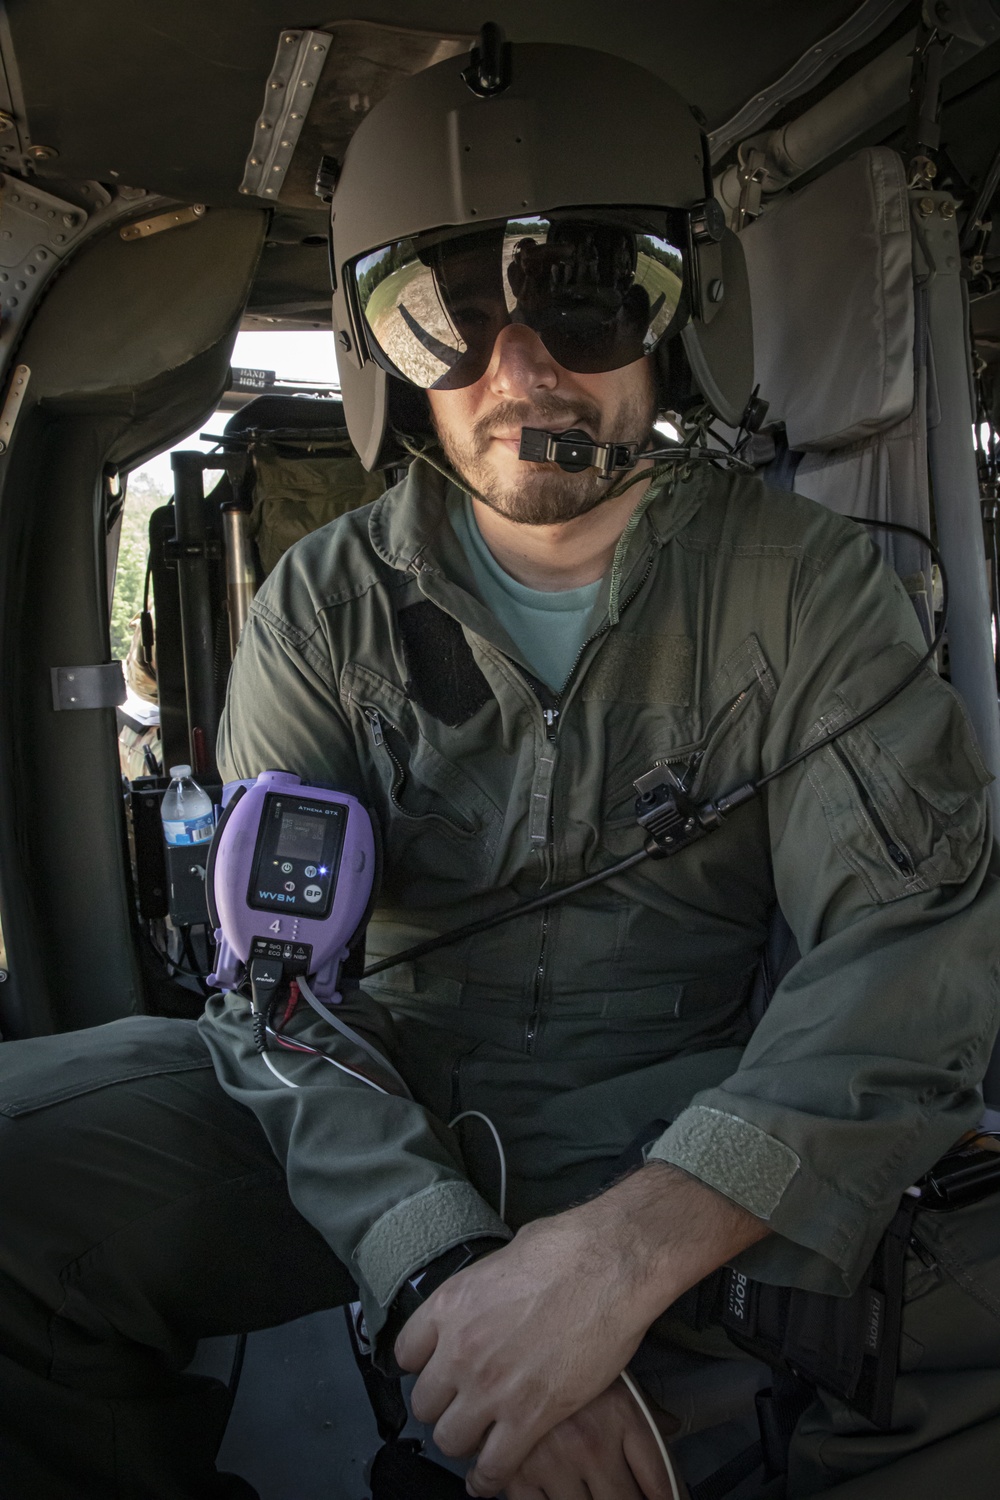 DVIDS - Images - The U.S. Army Aeromedical Research Laboratory